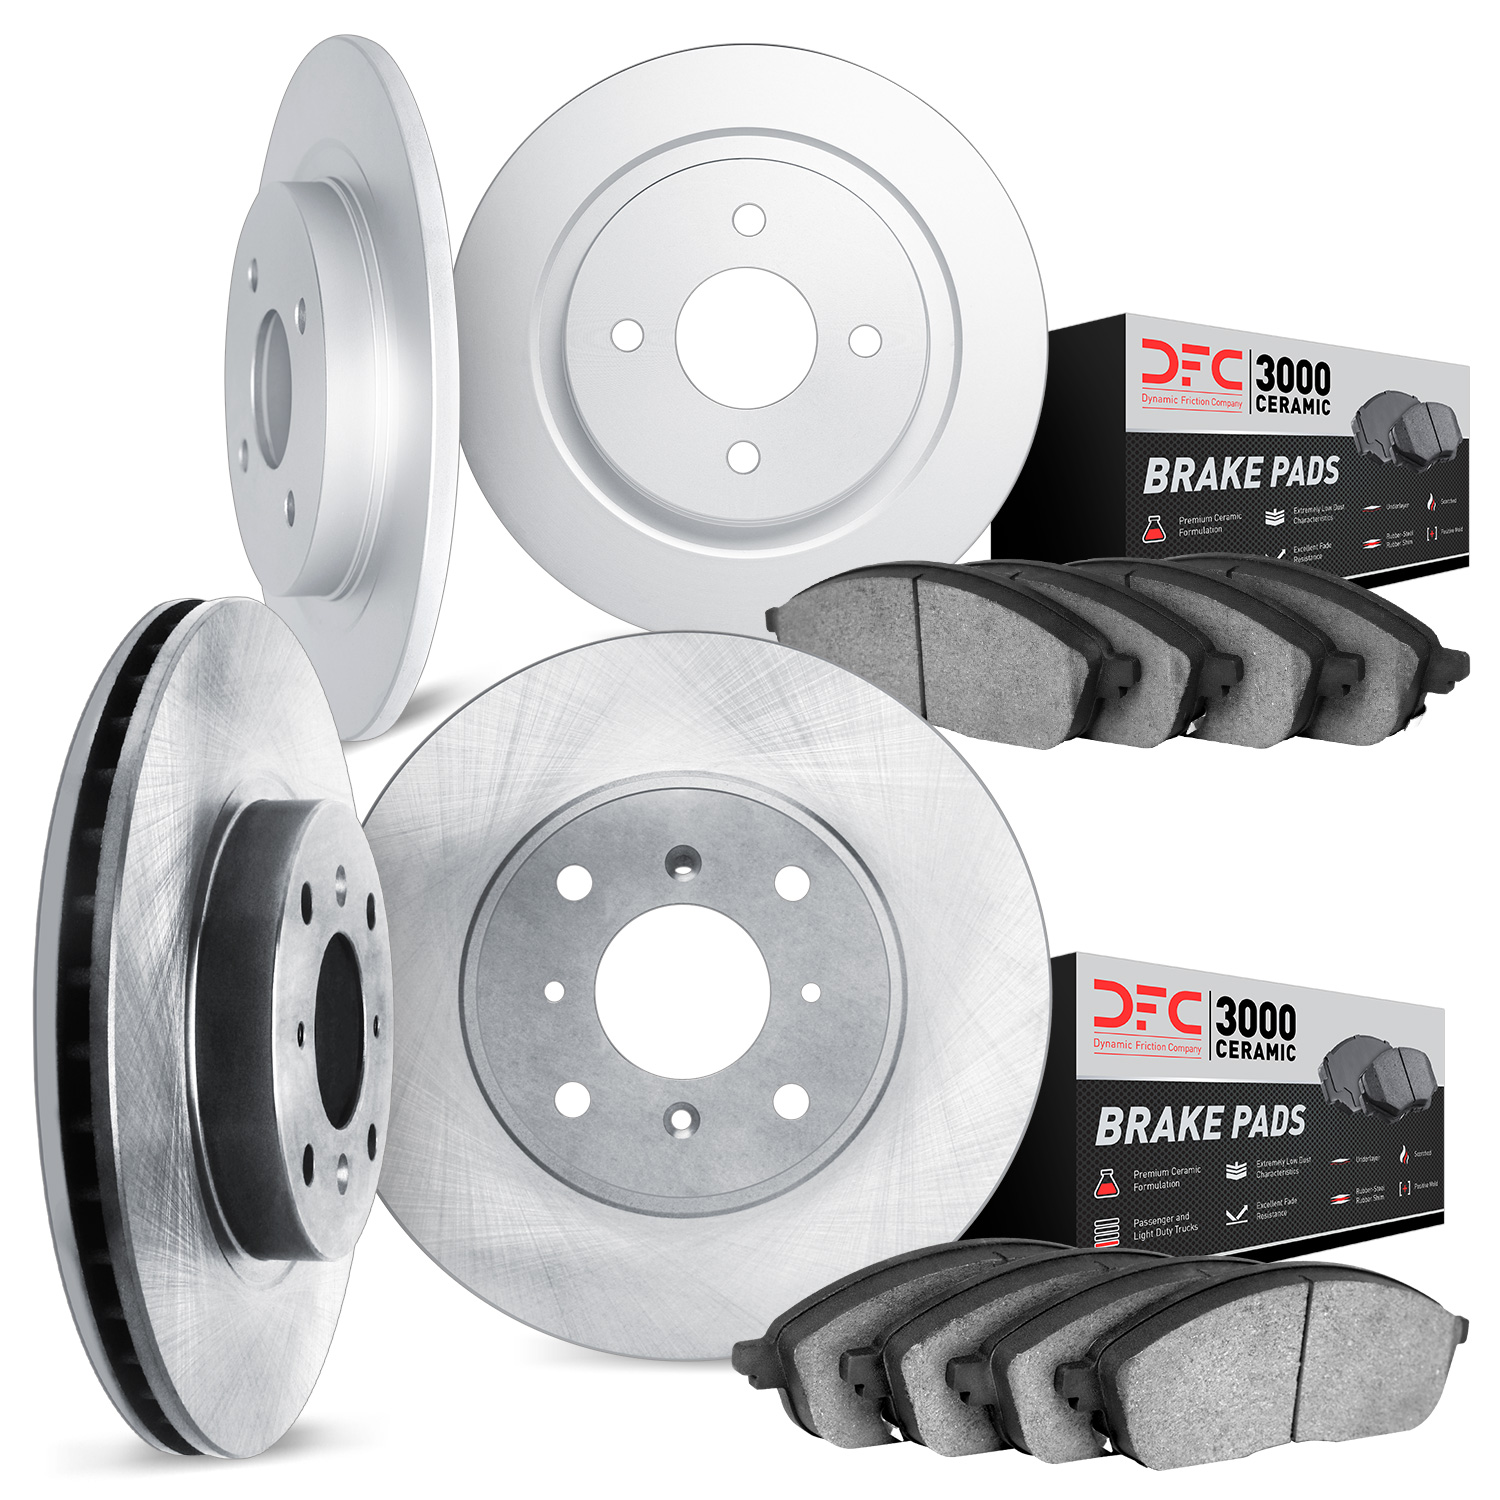 6304-03027 Brake Rotors with 3000-Series Ceramic Brake Pads Kit, 2006-2012 Multiple Makes/Models, Position: Front and Rear